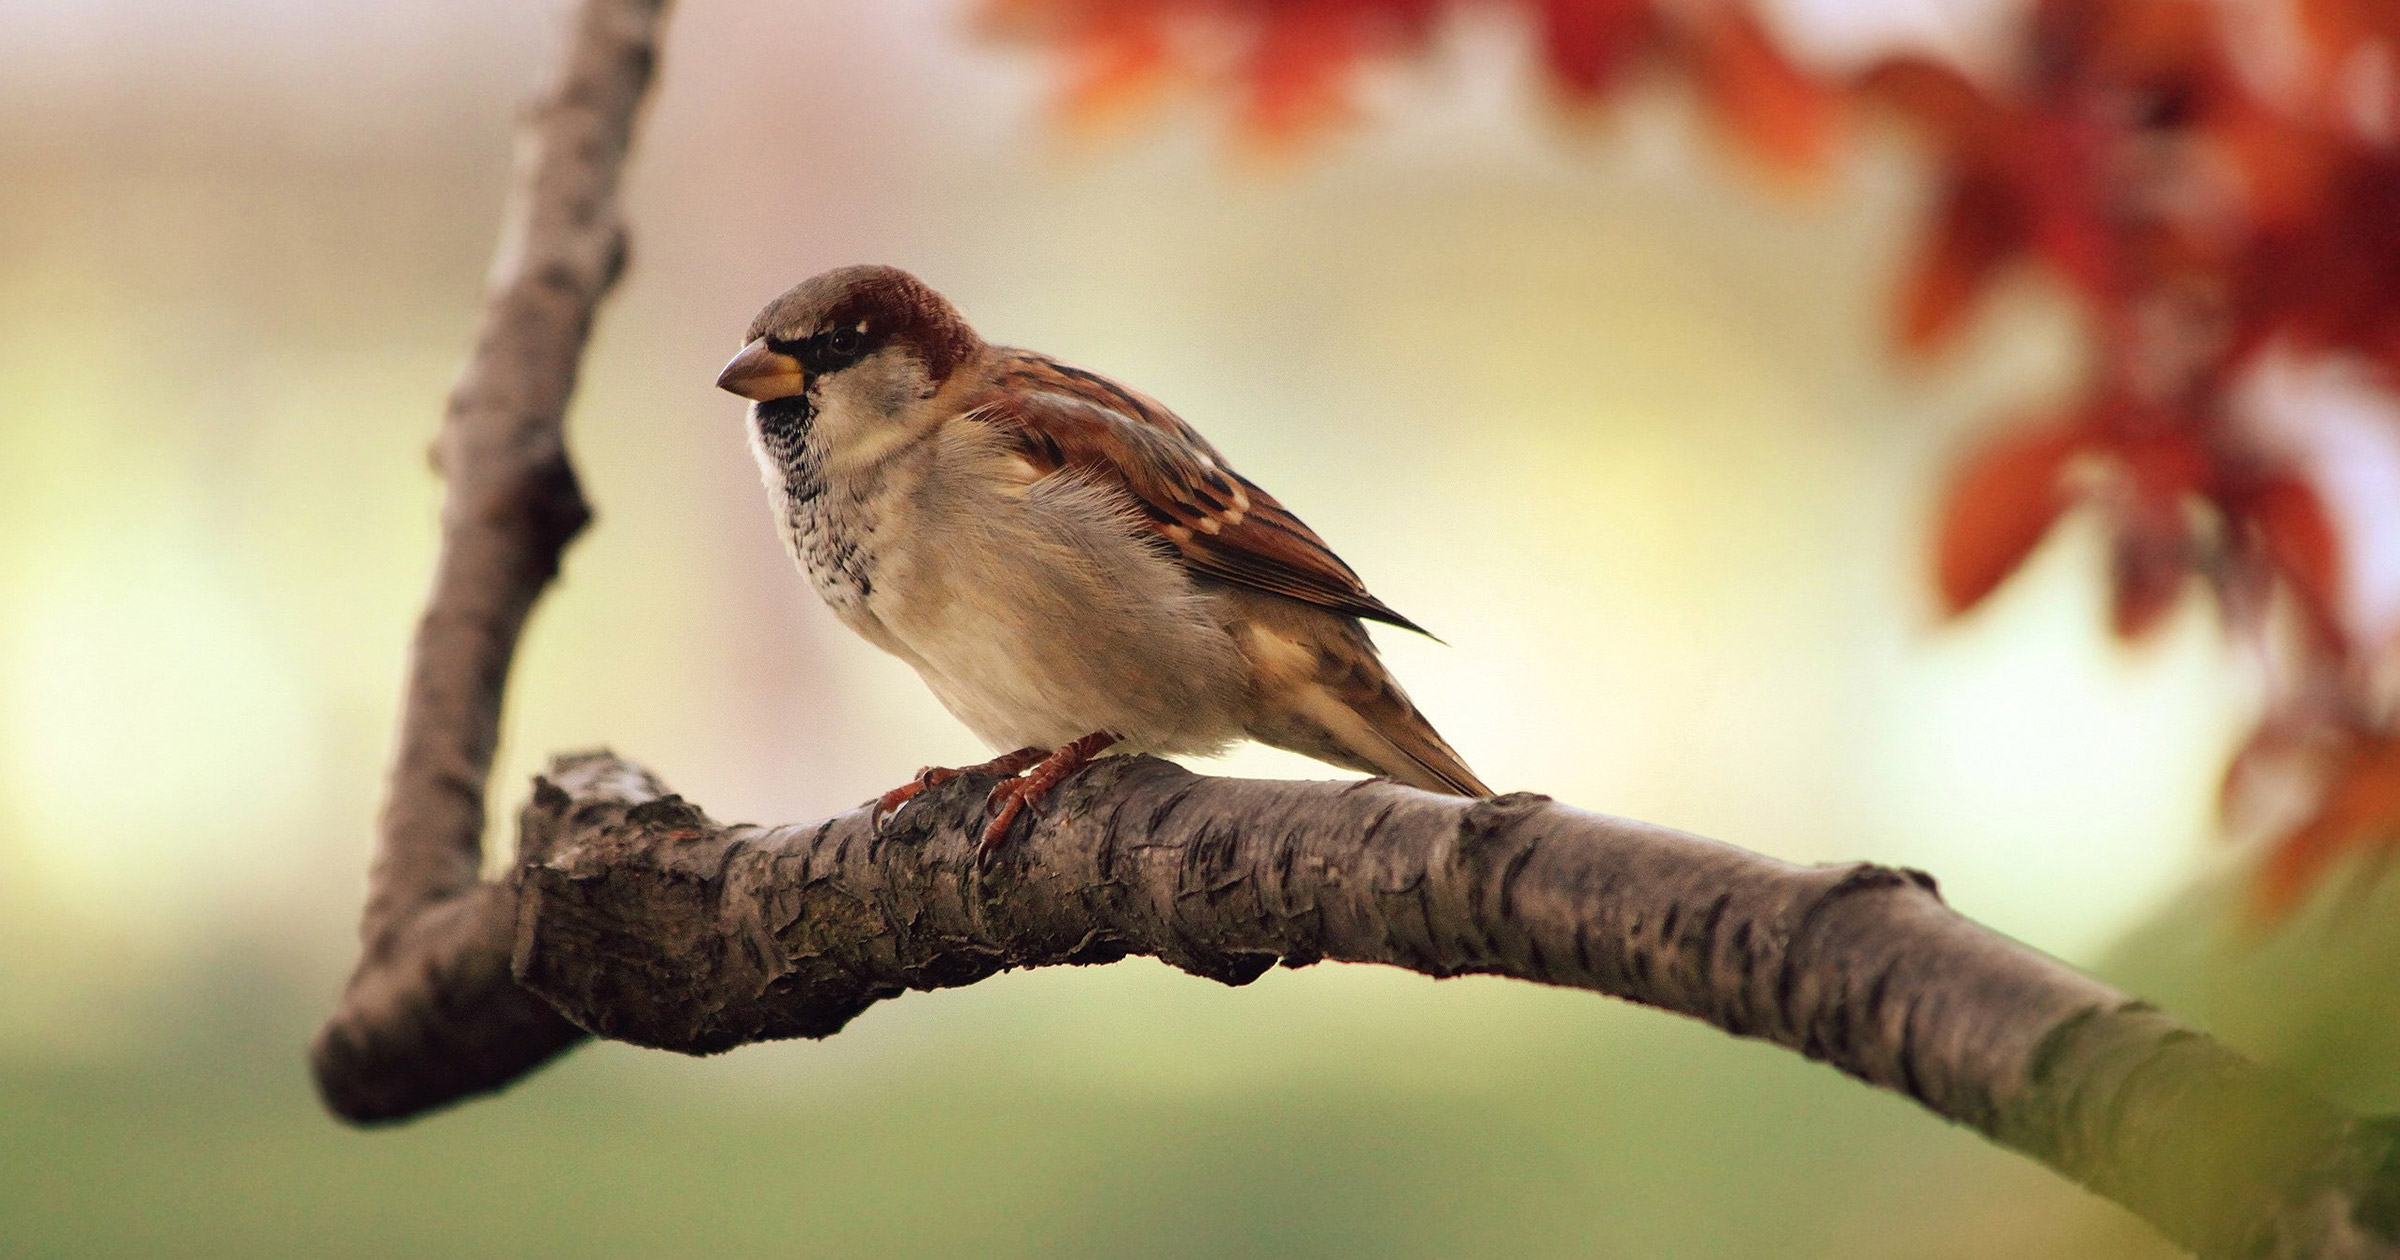 Sparrow on Branch